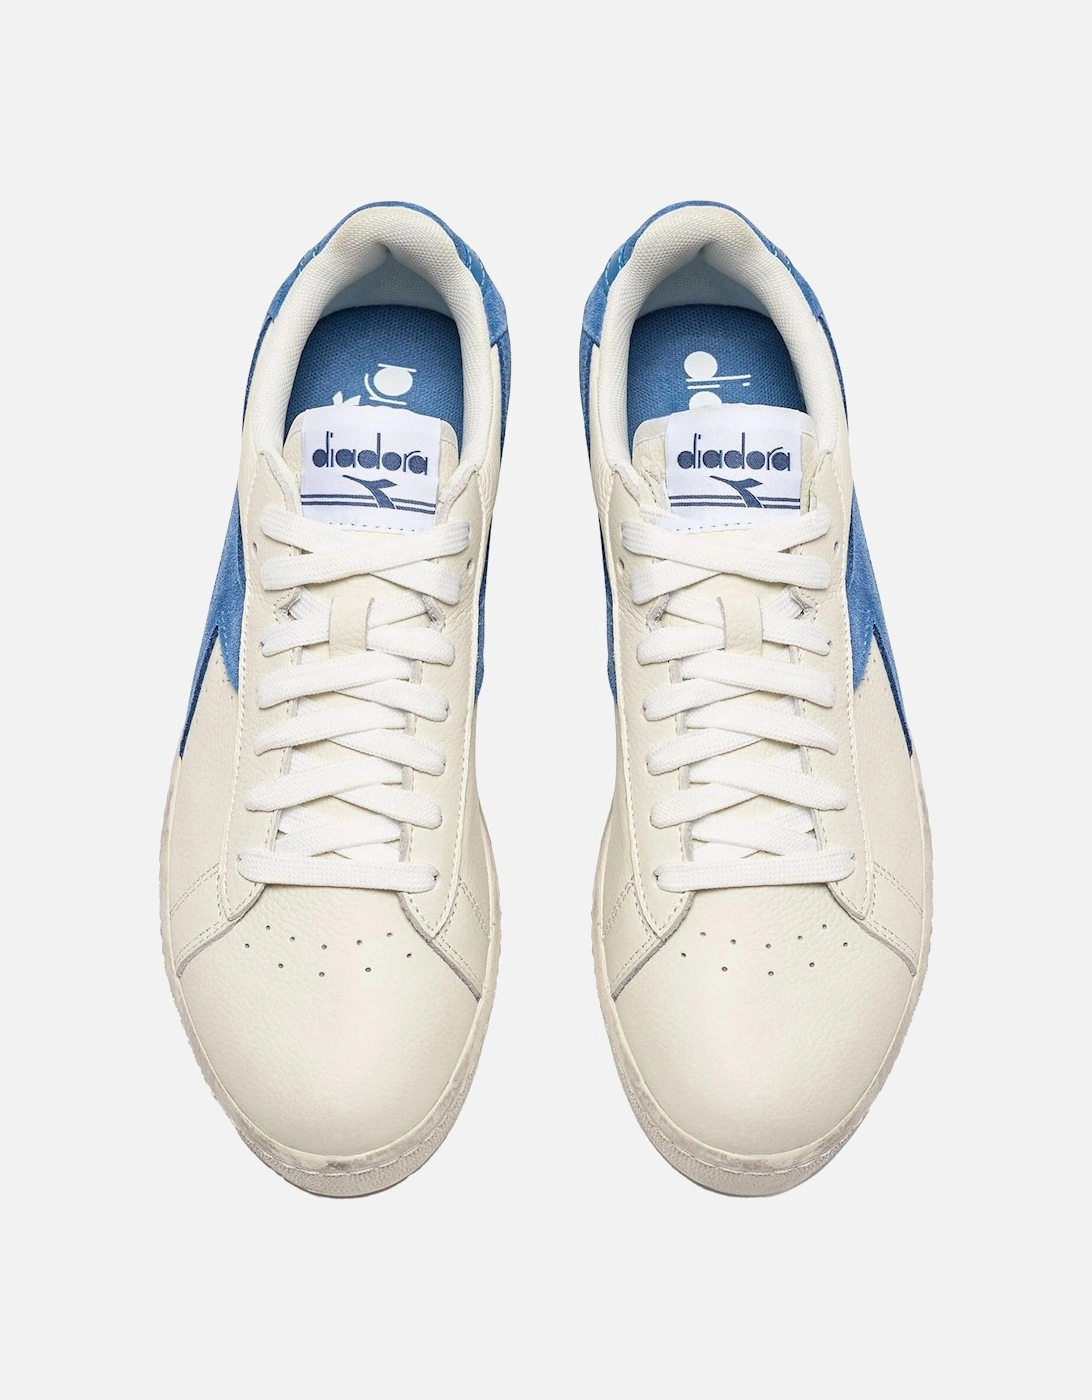 Mens Game Low Waxed Suede Pop Trainers (White/Blue)